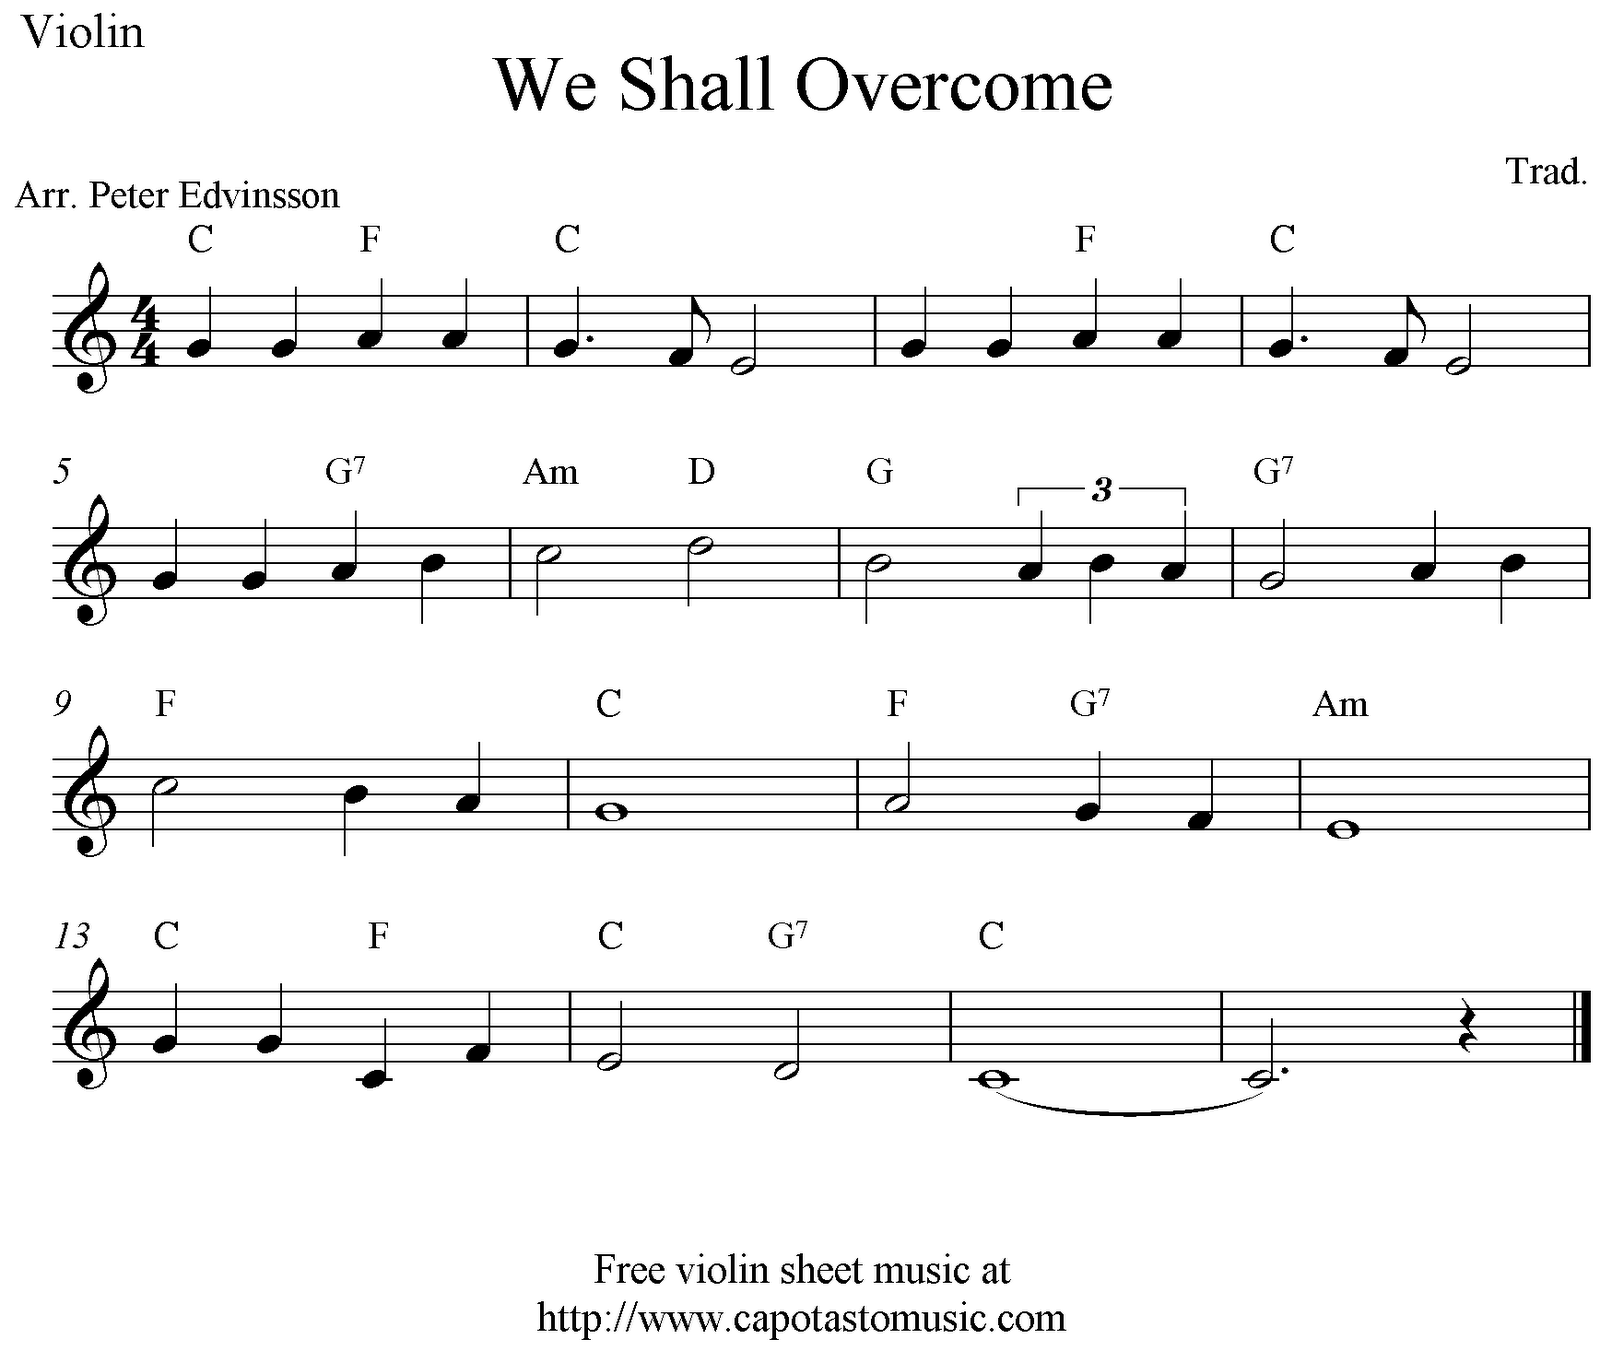 Violin sheet. We shall overcome Ноты. We shall overcome Ноты для фортепиано. We shall overcome гимн. We shall overcome текст.